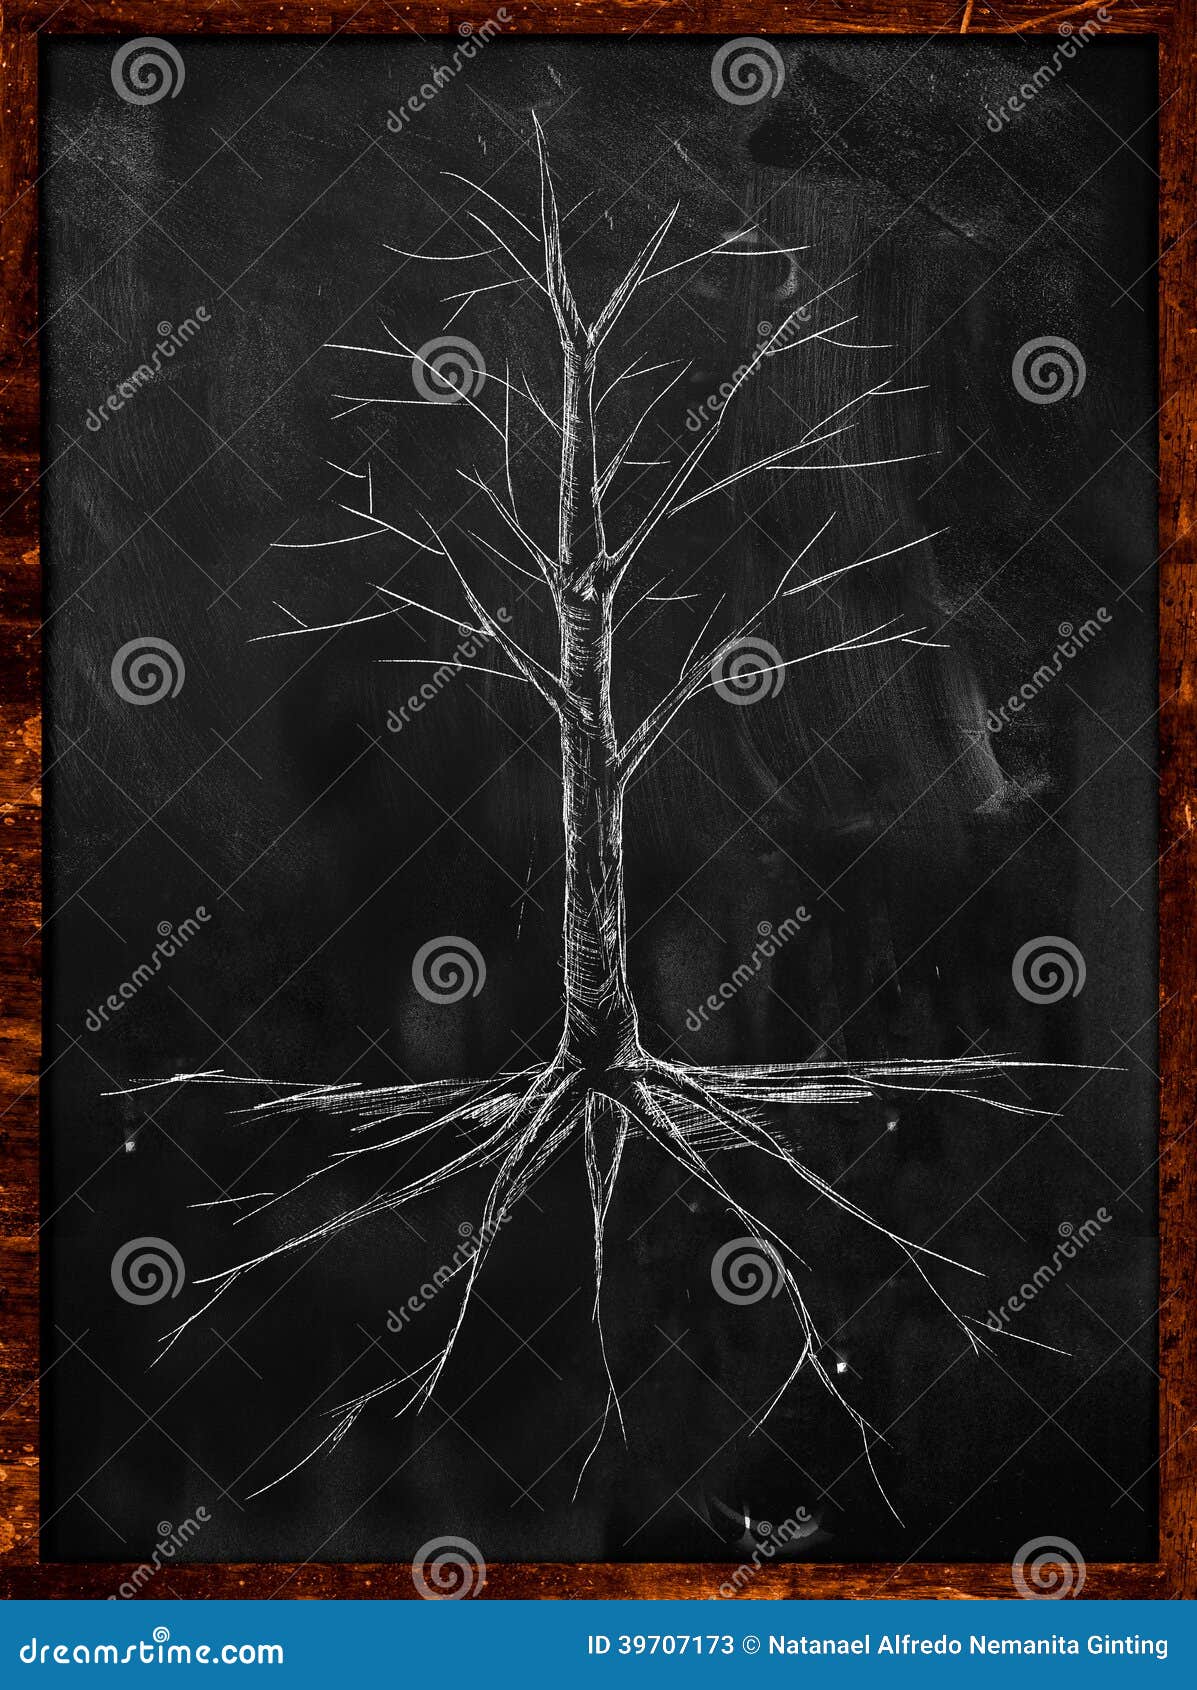 Tree without leaves Vectors & Illustrations for Free Download | Freepik